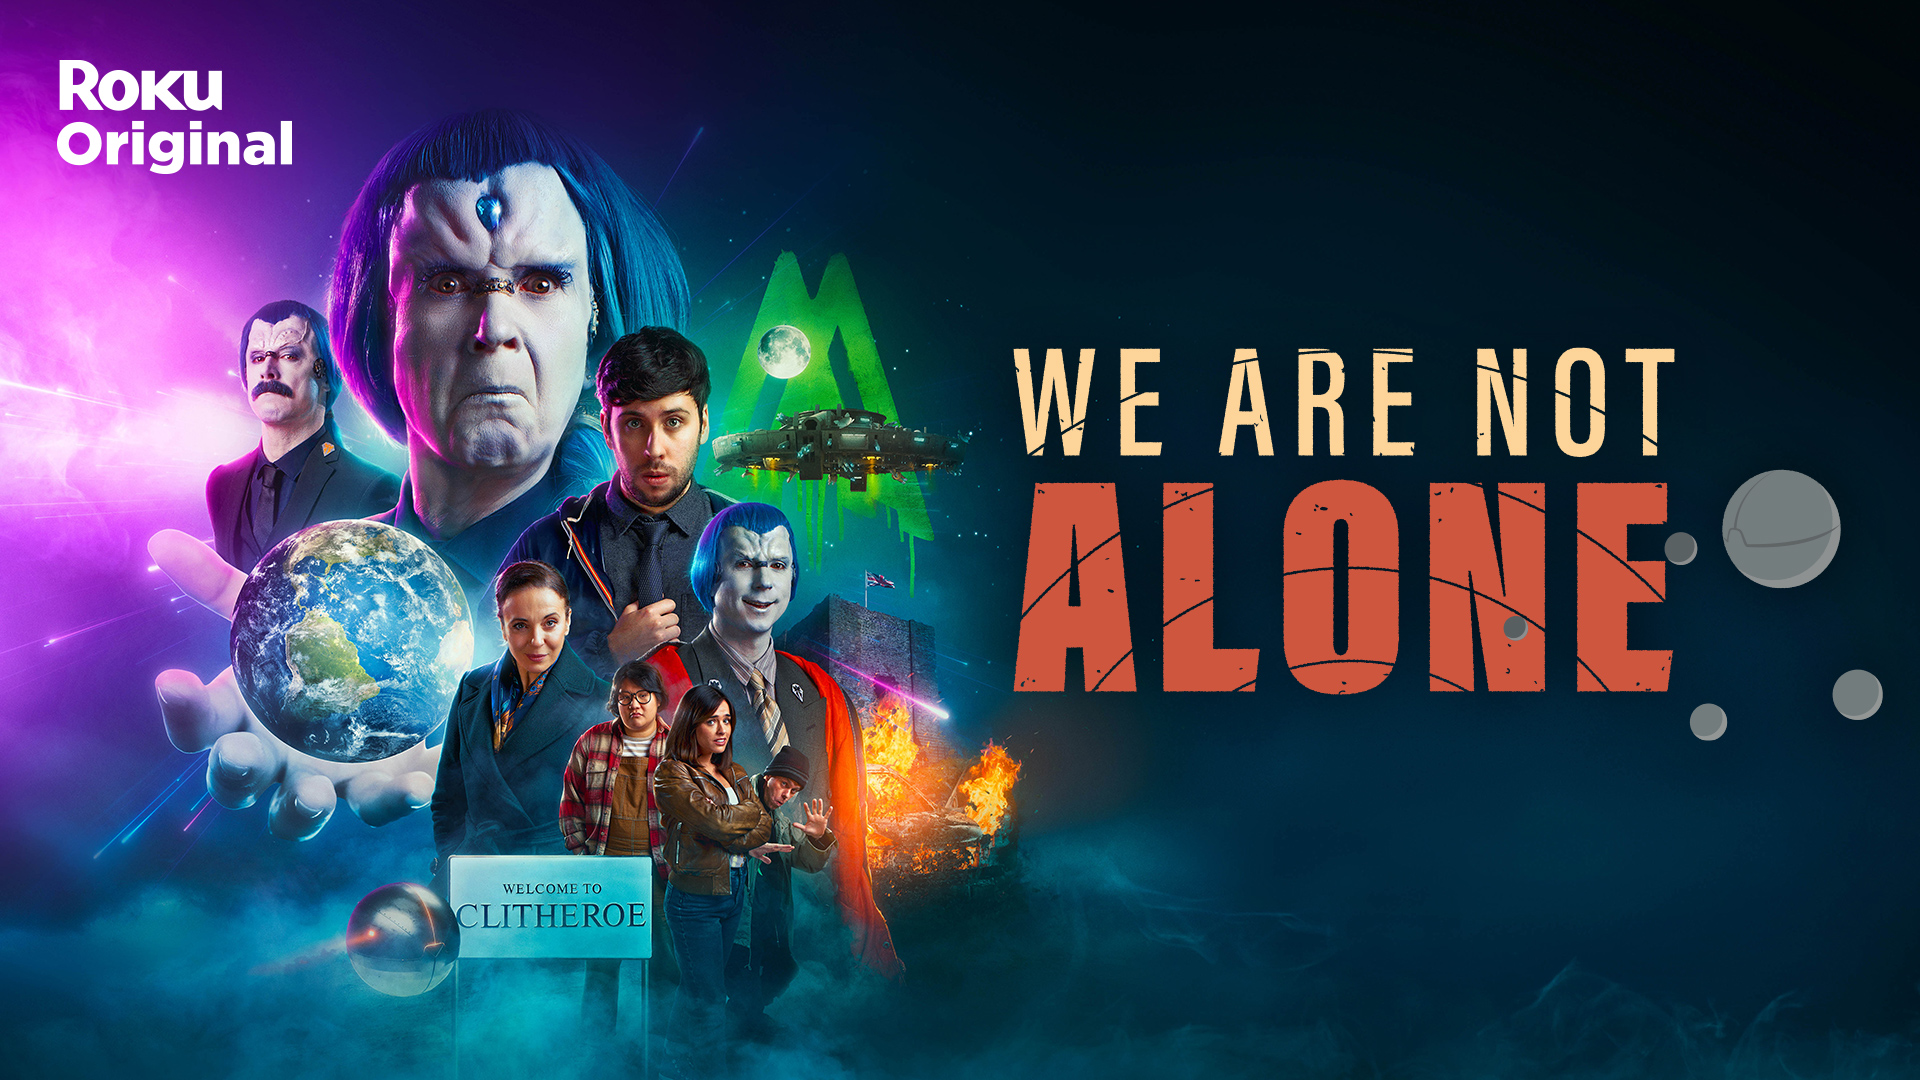 The Roku Channel Gets Exclusive Rights to “We Are Not Alone”